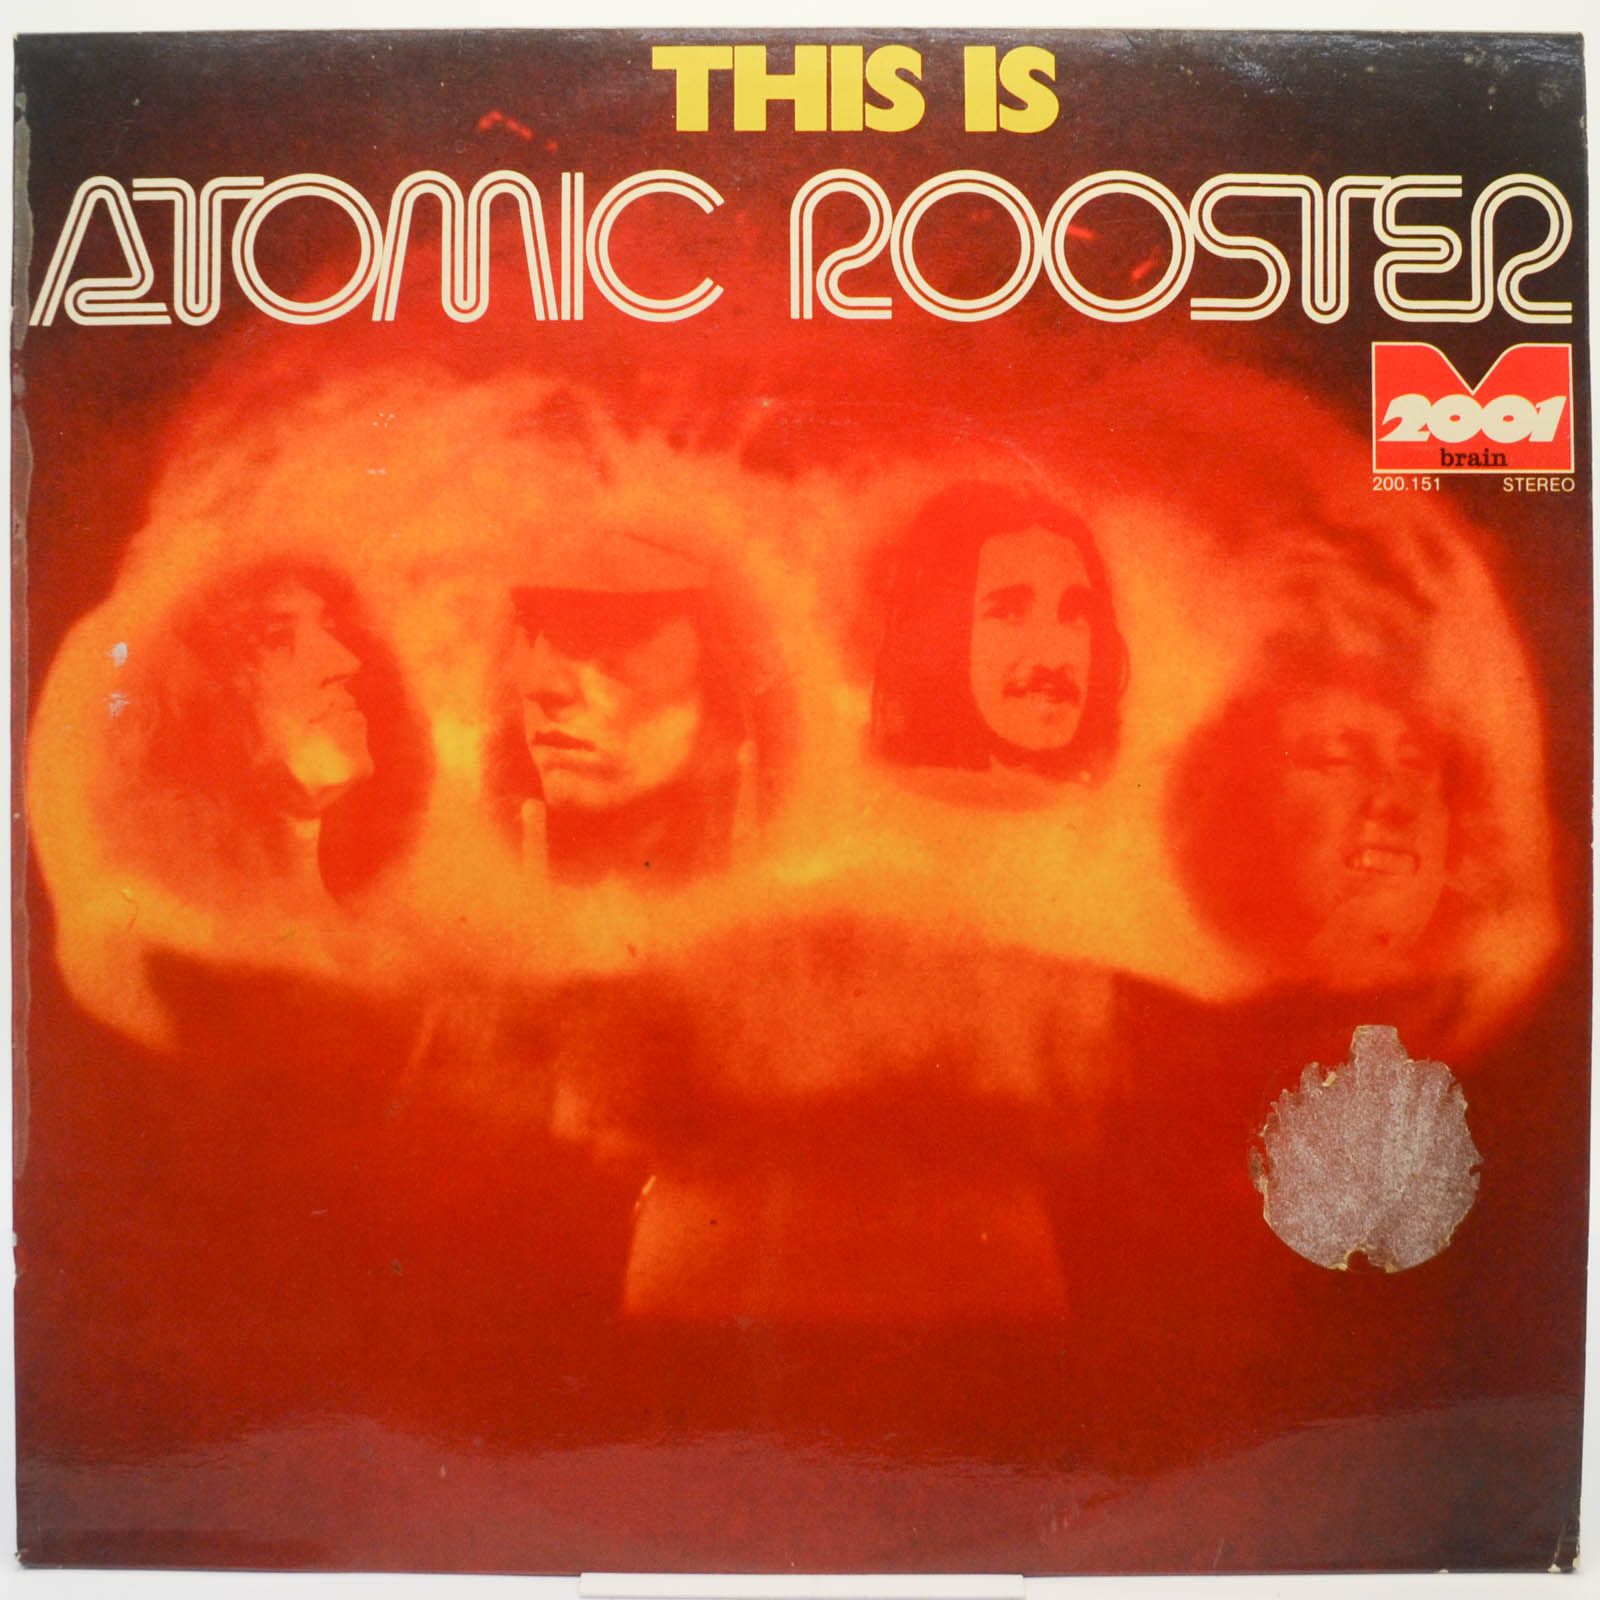 Atomic Rooster — This Is Atomic Rooster, 1974